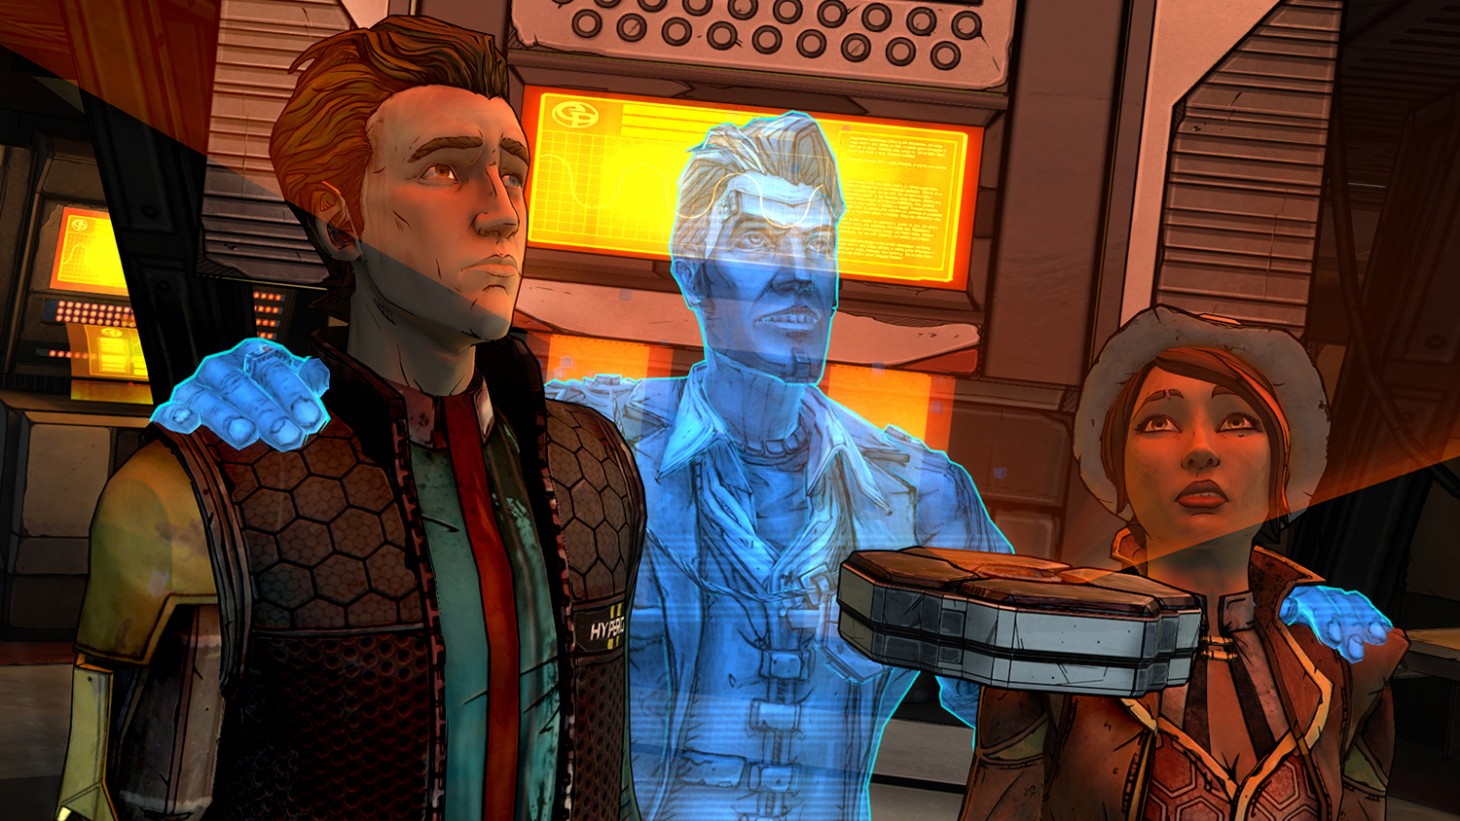 tales from the borderlands intros